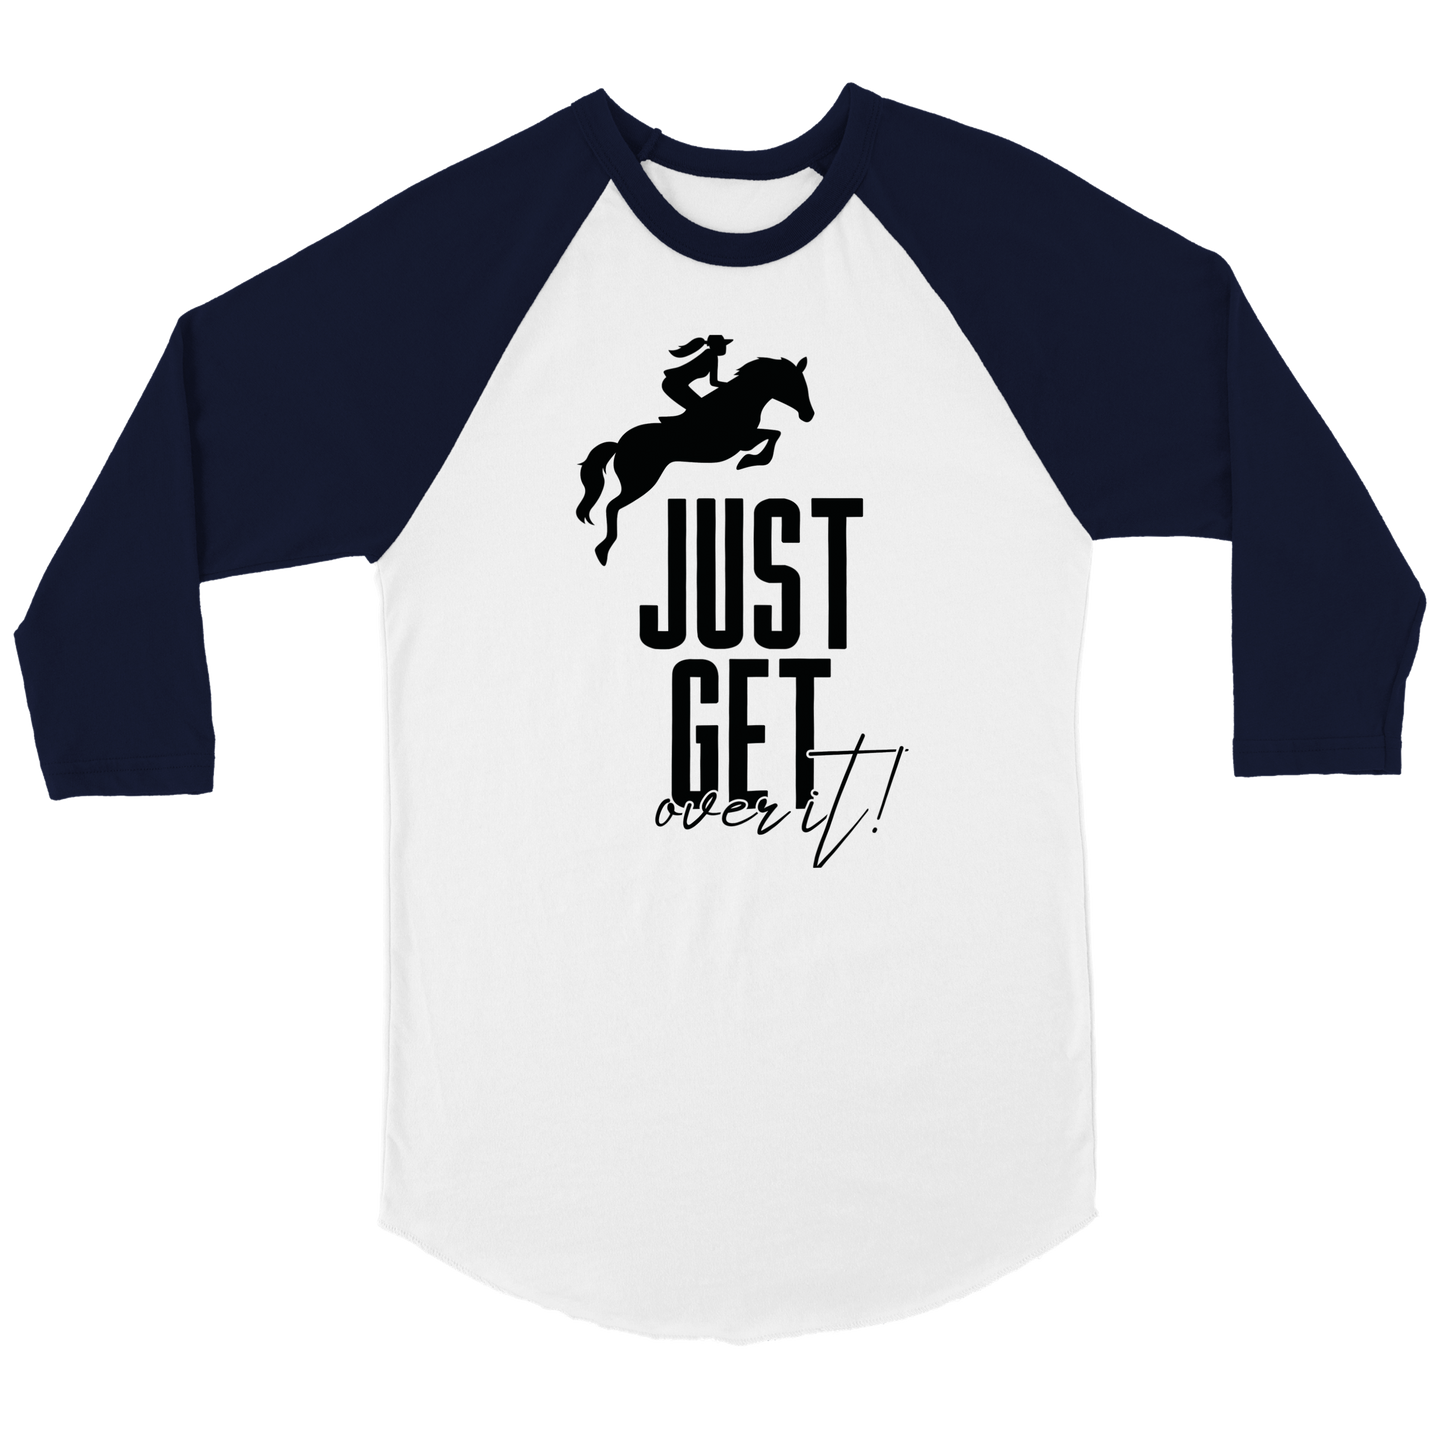 Hand Drawn Horse || Unisex 3/4 sleeve Raglan T-shirt - Design: "Get over It"; Static Design; Personalizable Back Text